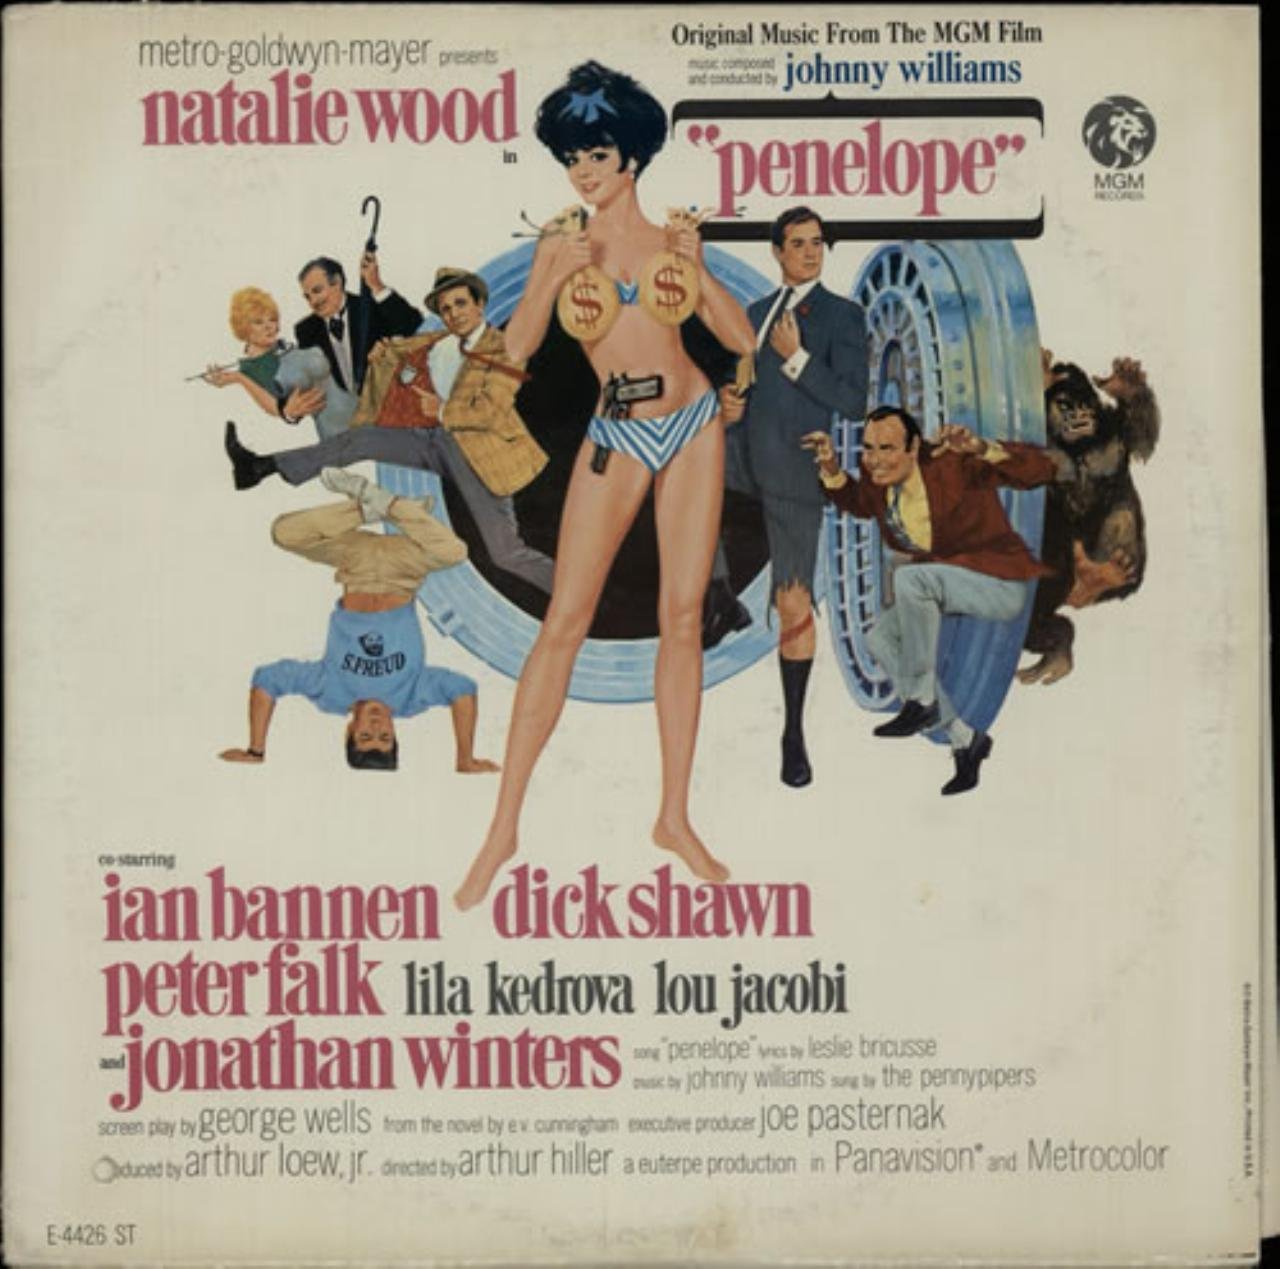 Original Music From The MGM Film Penelope